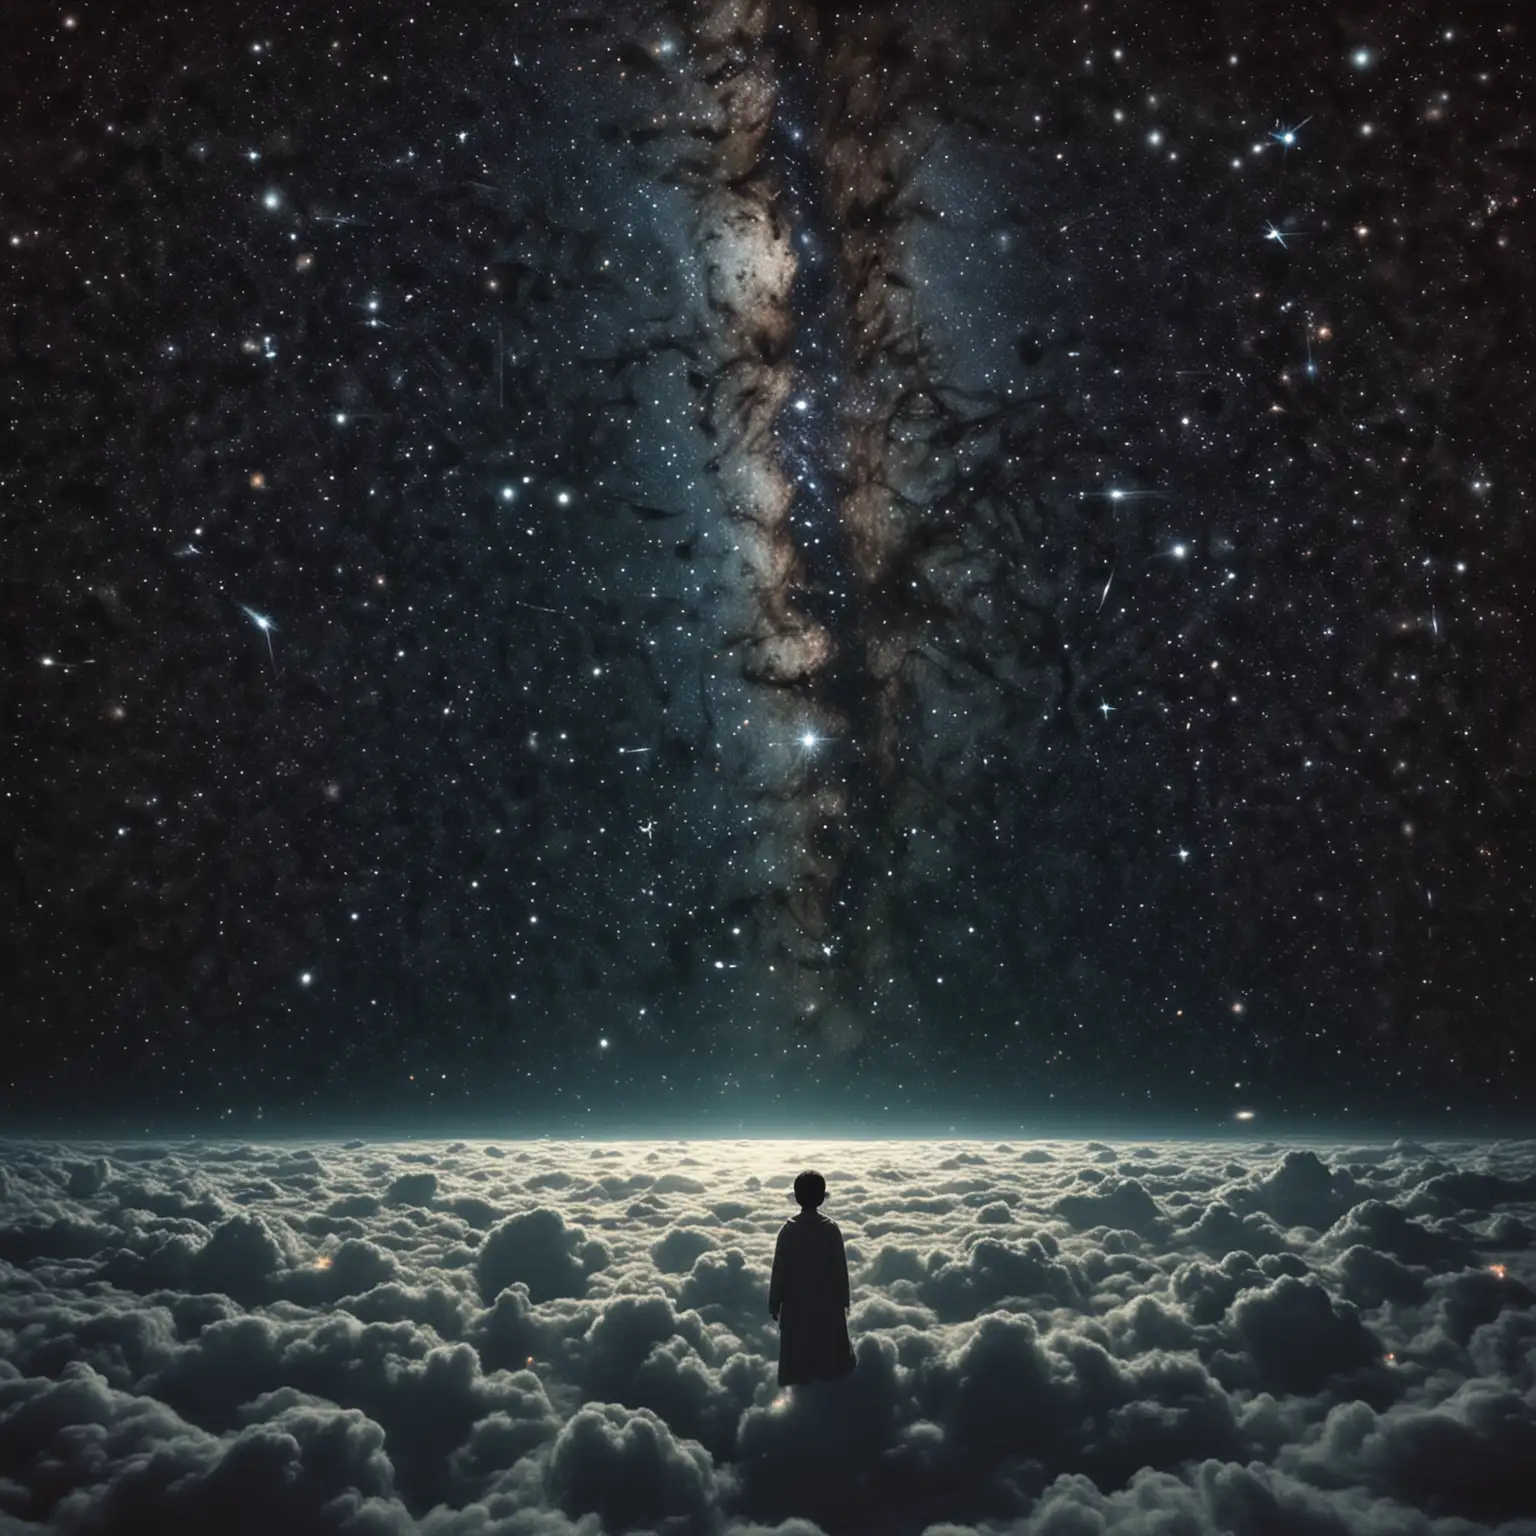 Solitary-Human-Drifting-Towards-Distant-Starlight-in-Deep-Silent-Universe